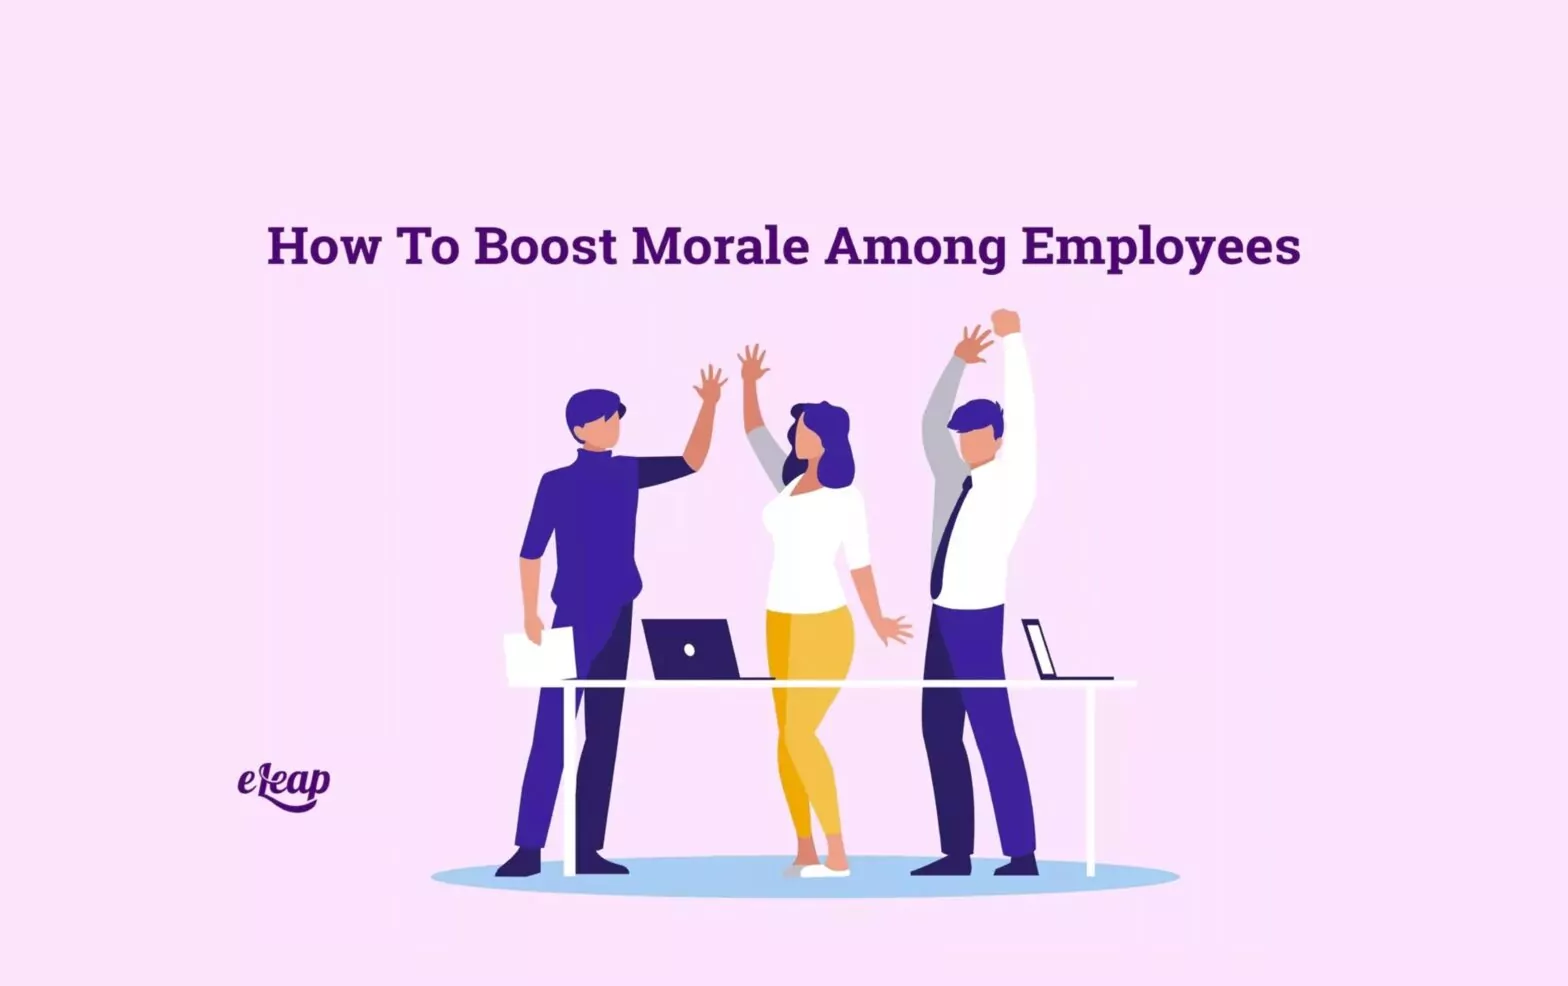 How to Boost Morale Among Employees